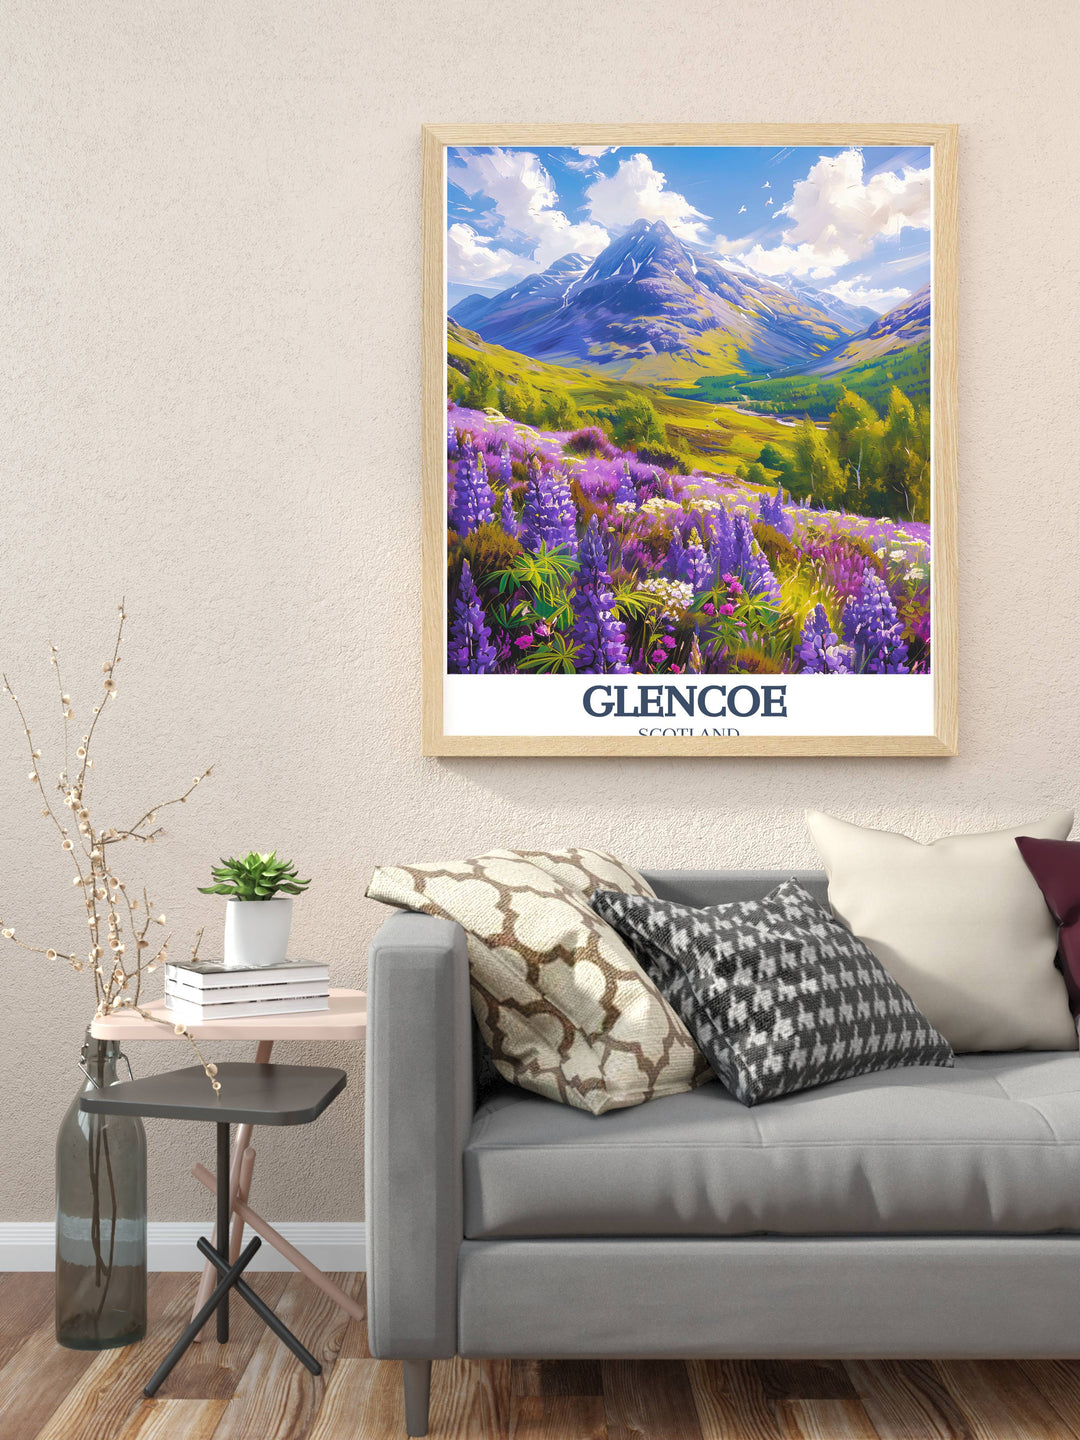 Cherish the majestic and wild spirit of Scotland through this Glencoe Gift Art, a testament to the country's rich landscapes and heritage.